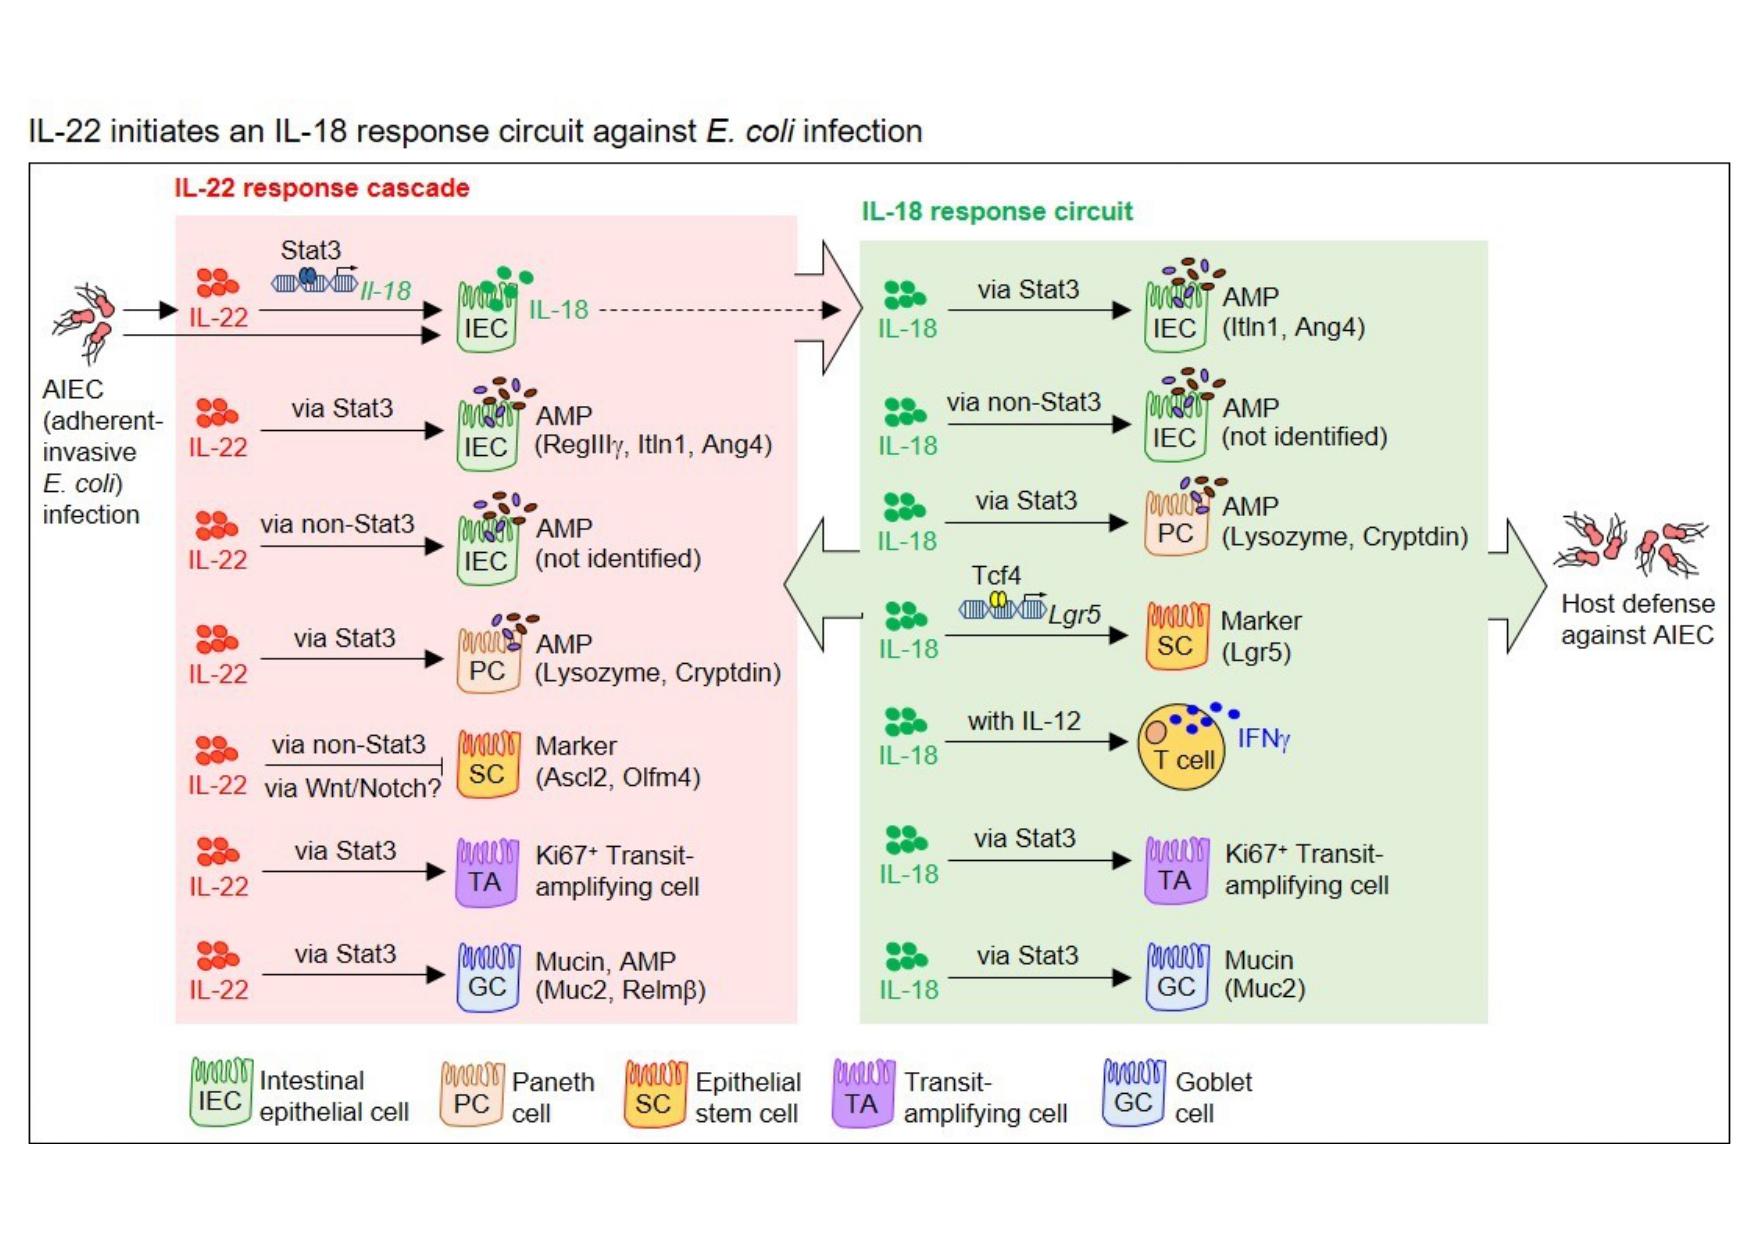 A novel IL-18-mediated anti-bacterial circuit to enforce intestinal host defense and immunity